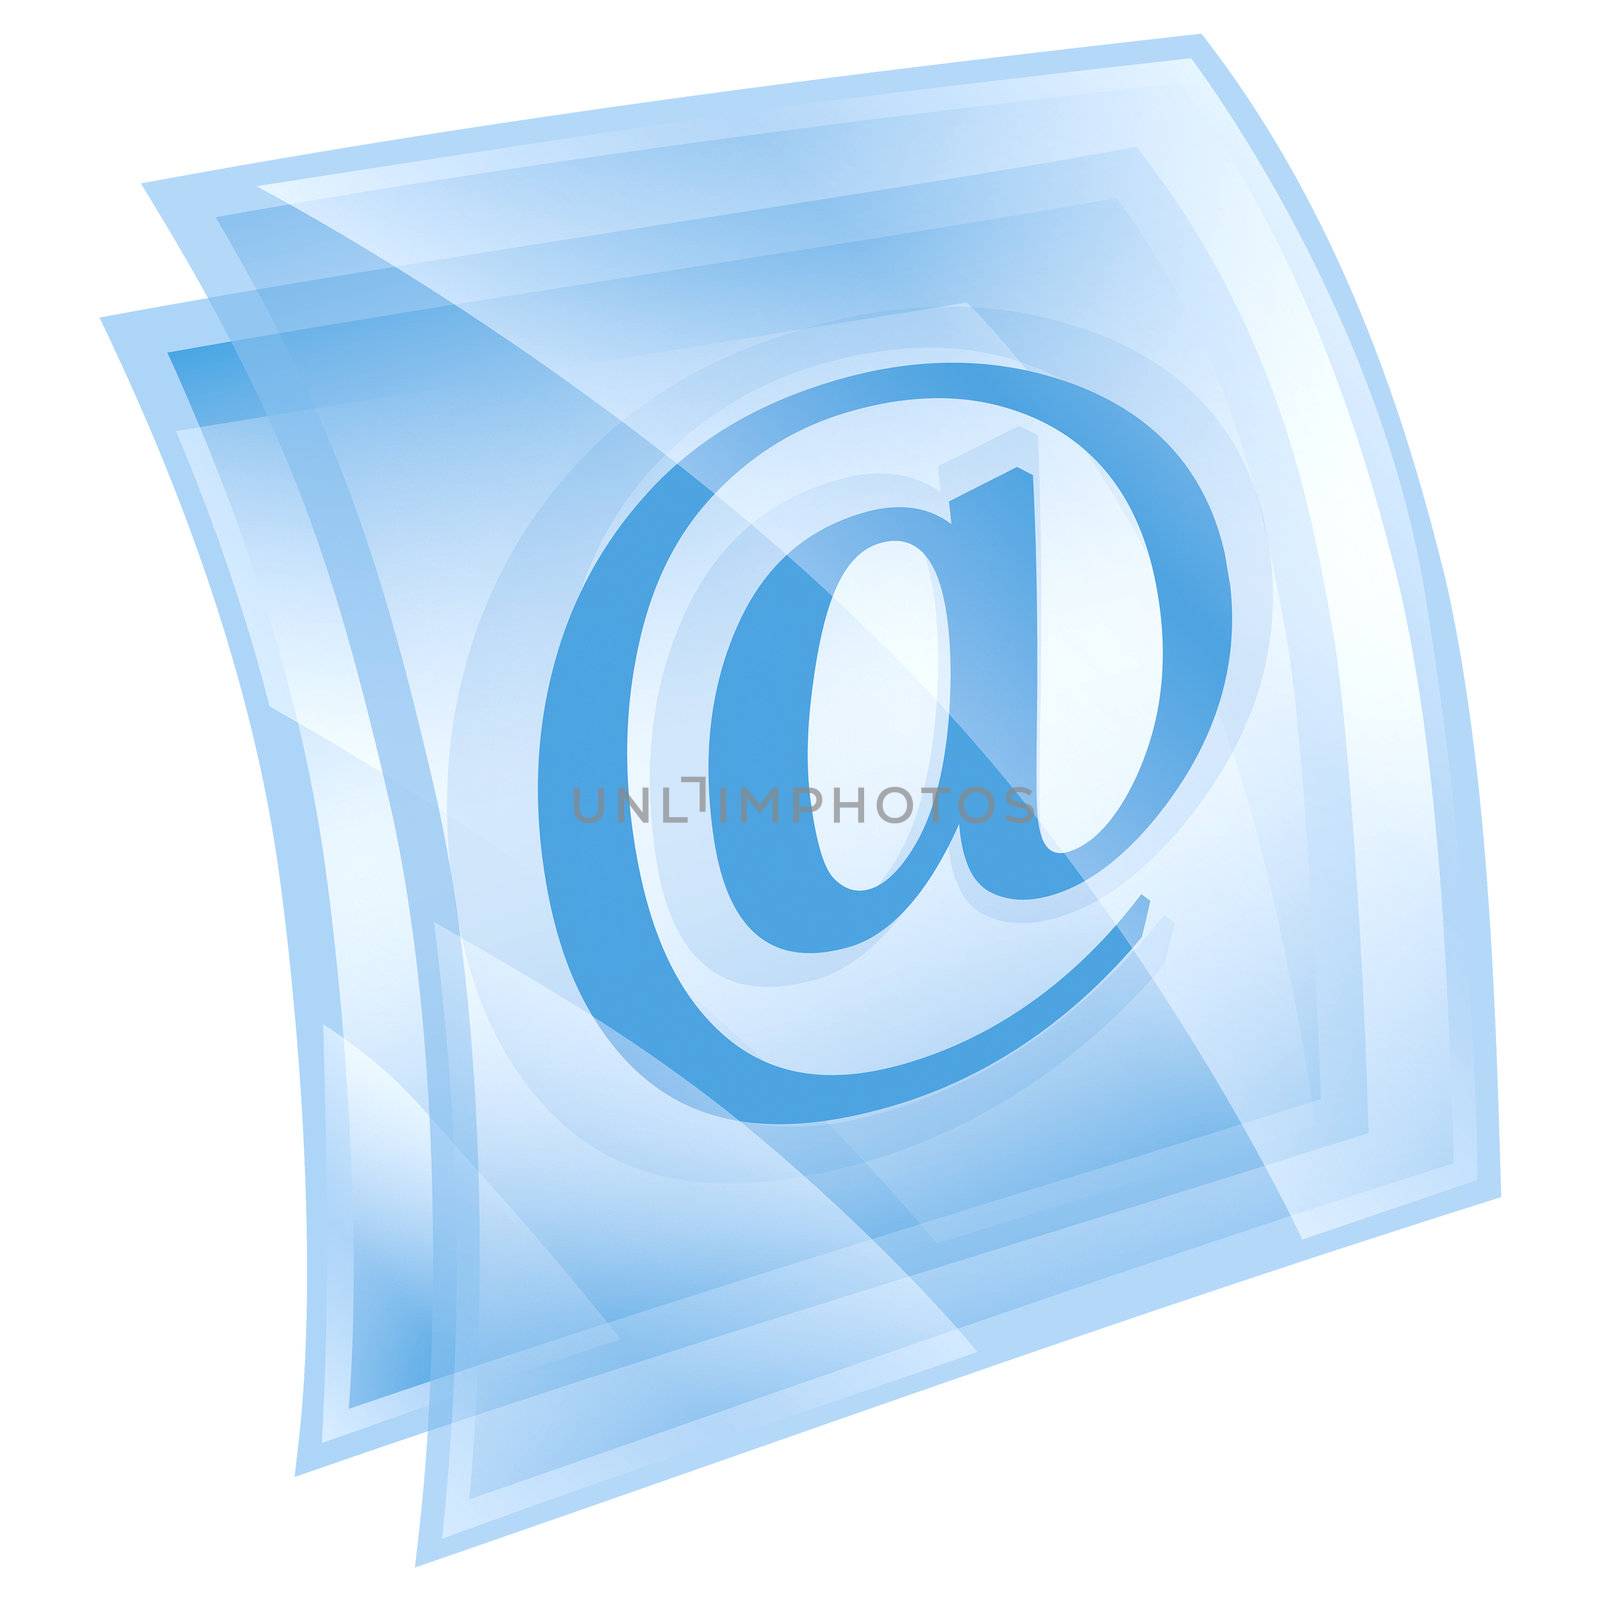 email symbol blue square, isolated on white background.